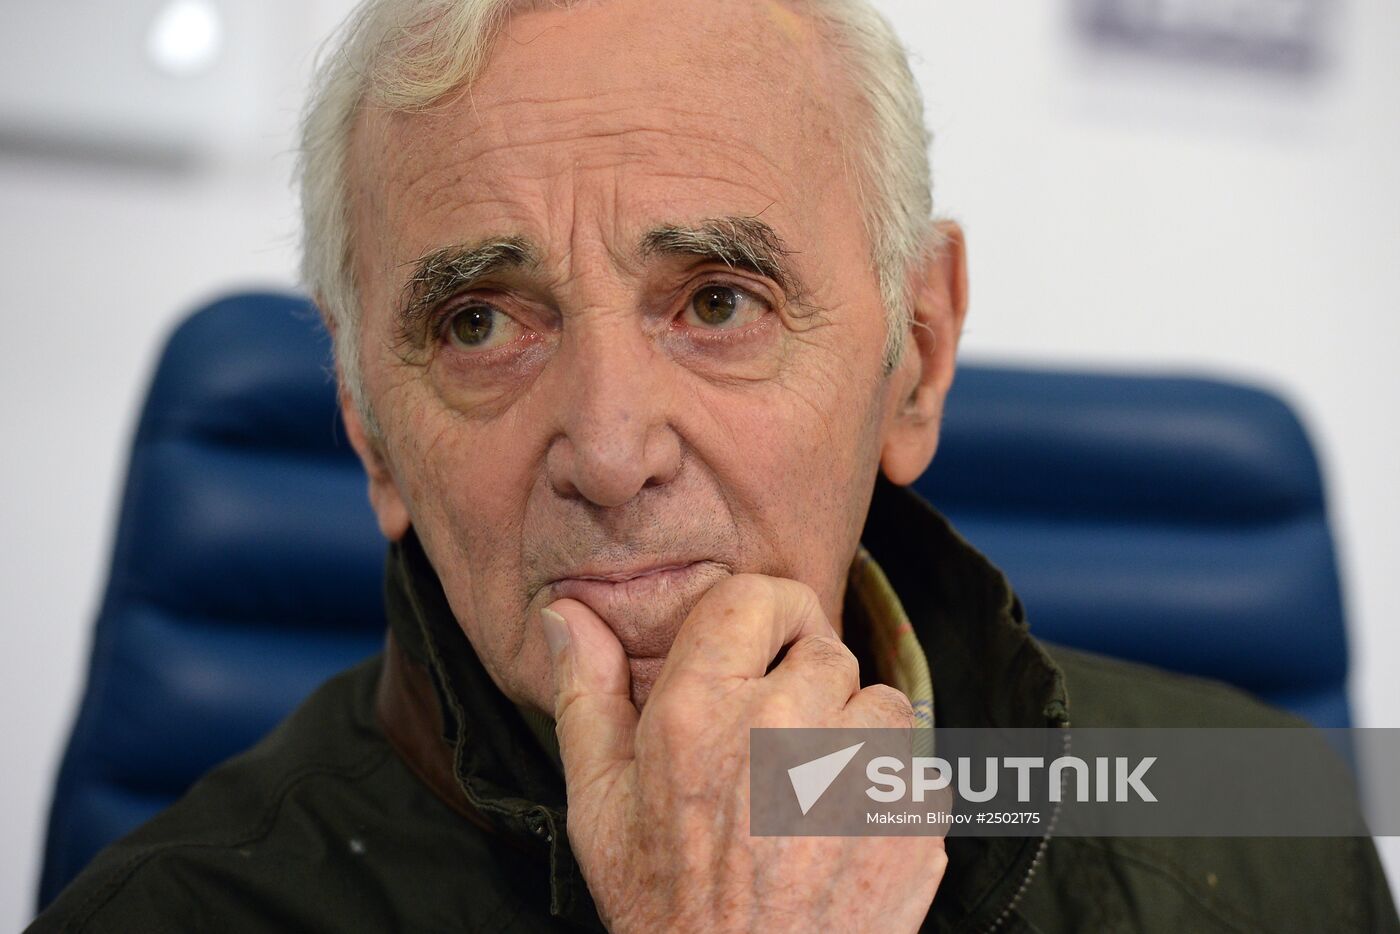 News conference with Charles Aznavour